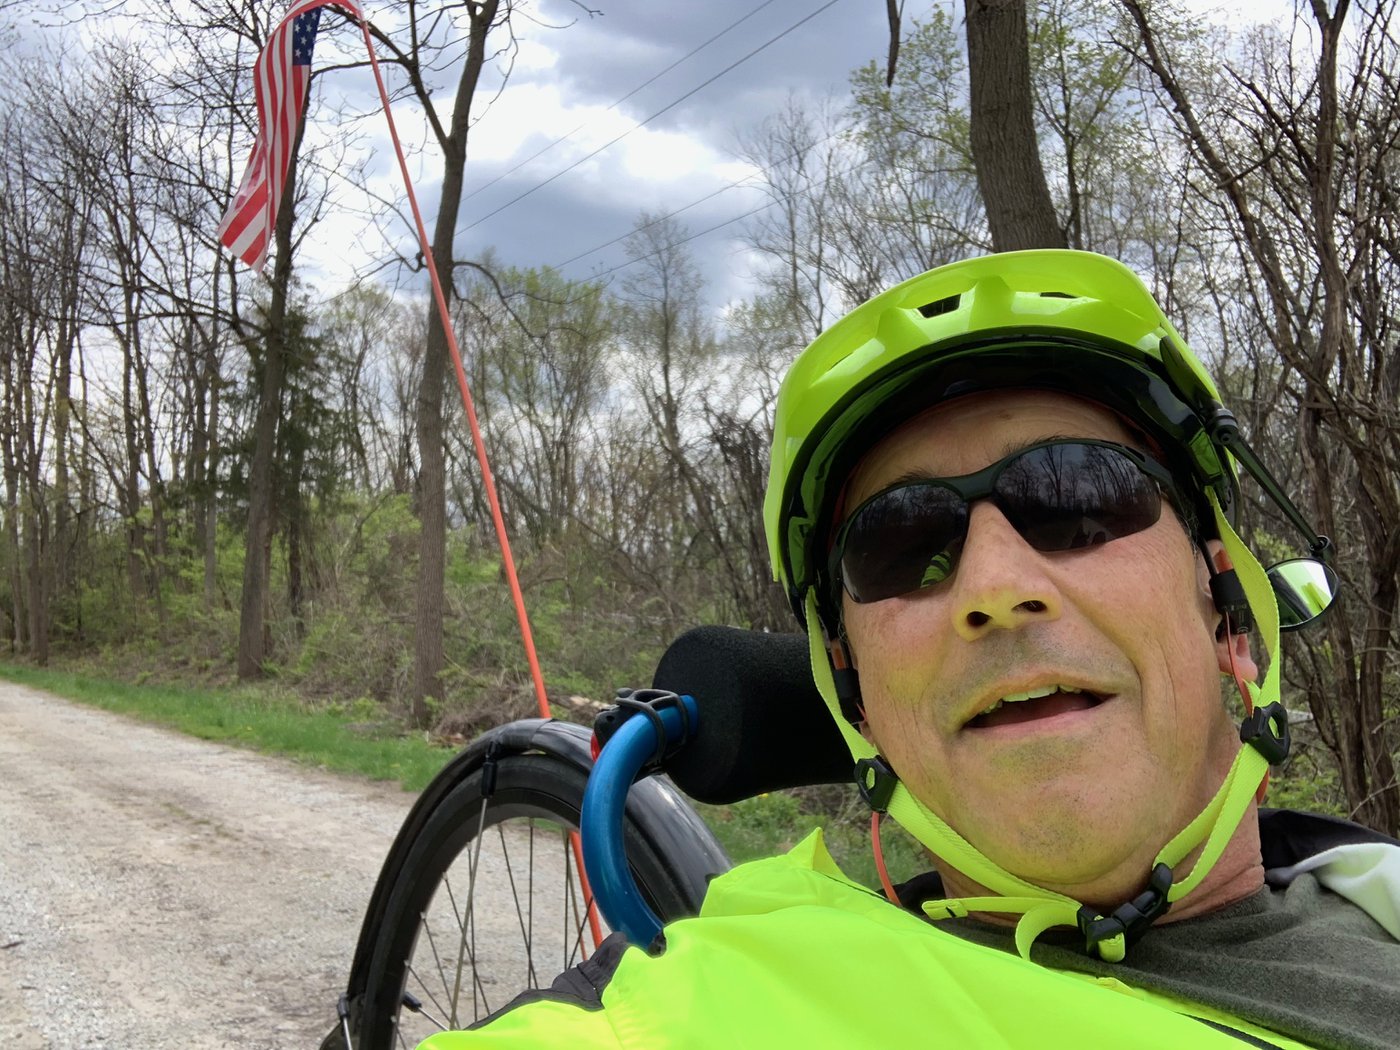 My favorite fun thing for relaxation -- riding my recumbent trike through DuPage and beyond!  Working up to a cross-country ride on Route 66!